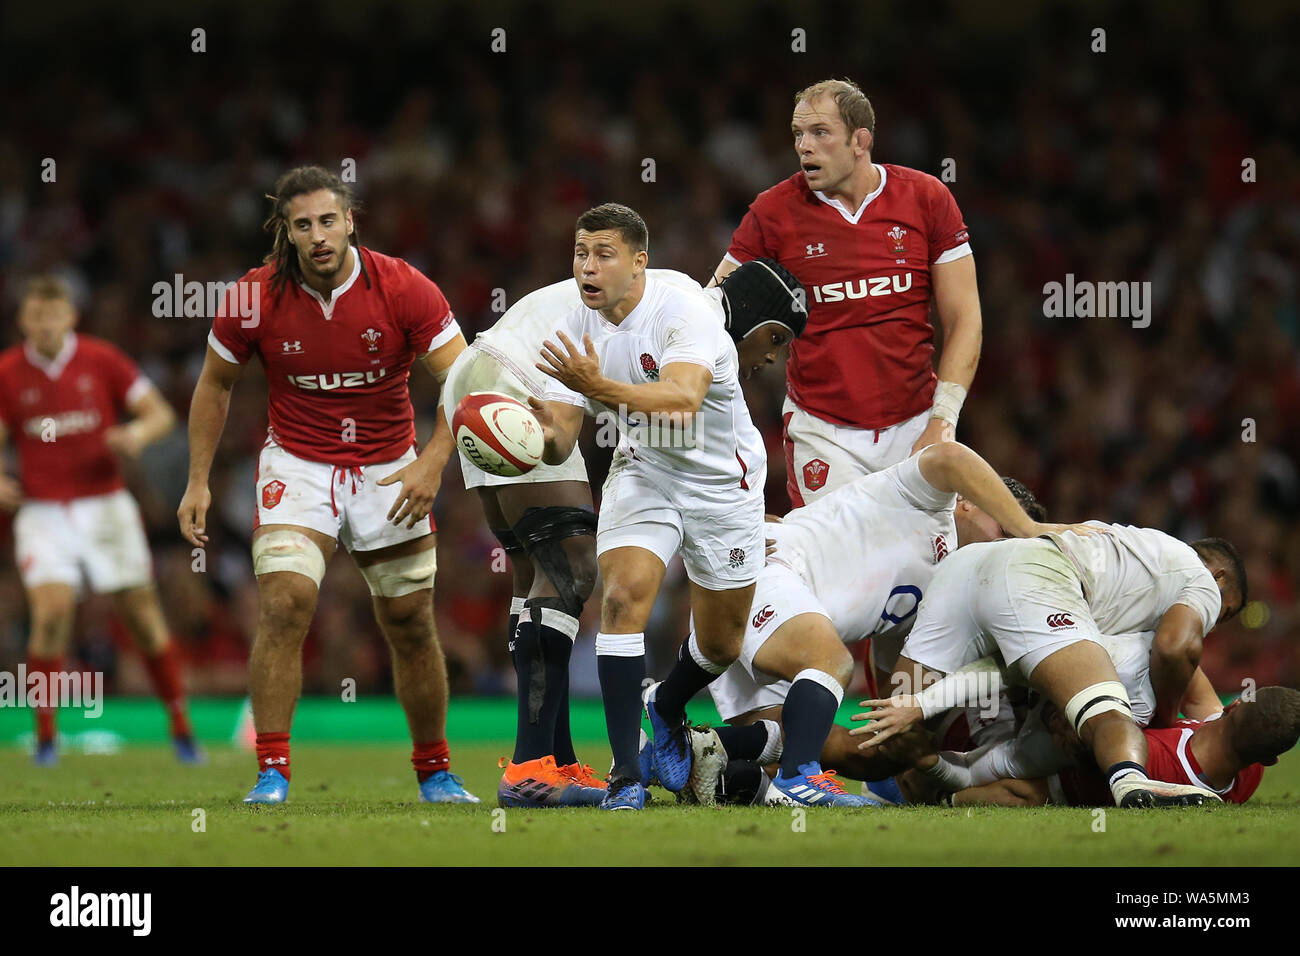 Cardiff, UK. 17th Aug, 2019. Ben Youngs of England in action. Wales v  England, Under Armour summer series 2019 international rugby match at the  Principality Stadium in Cardiff, Wales, UK on Saturday